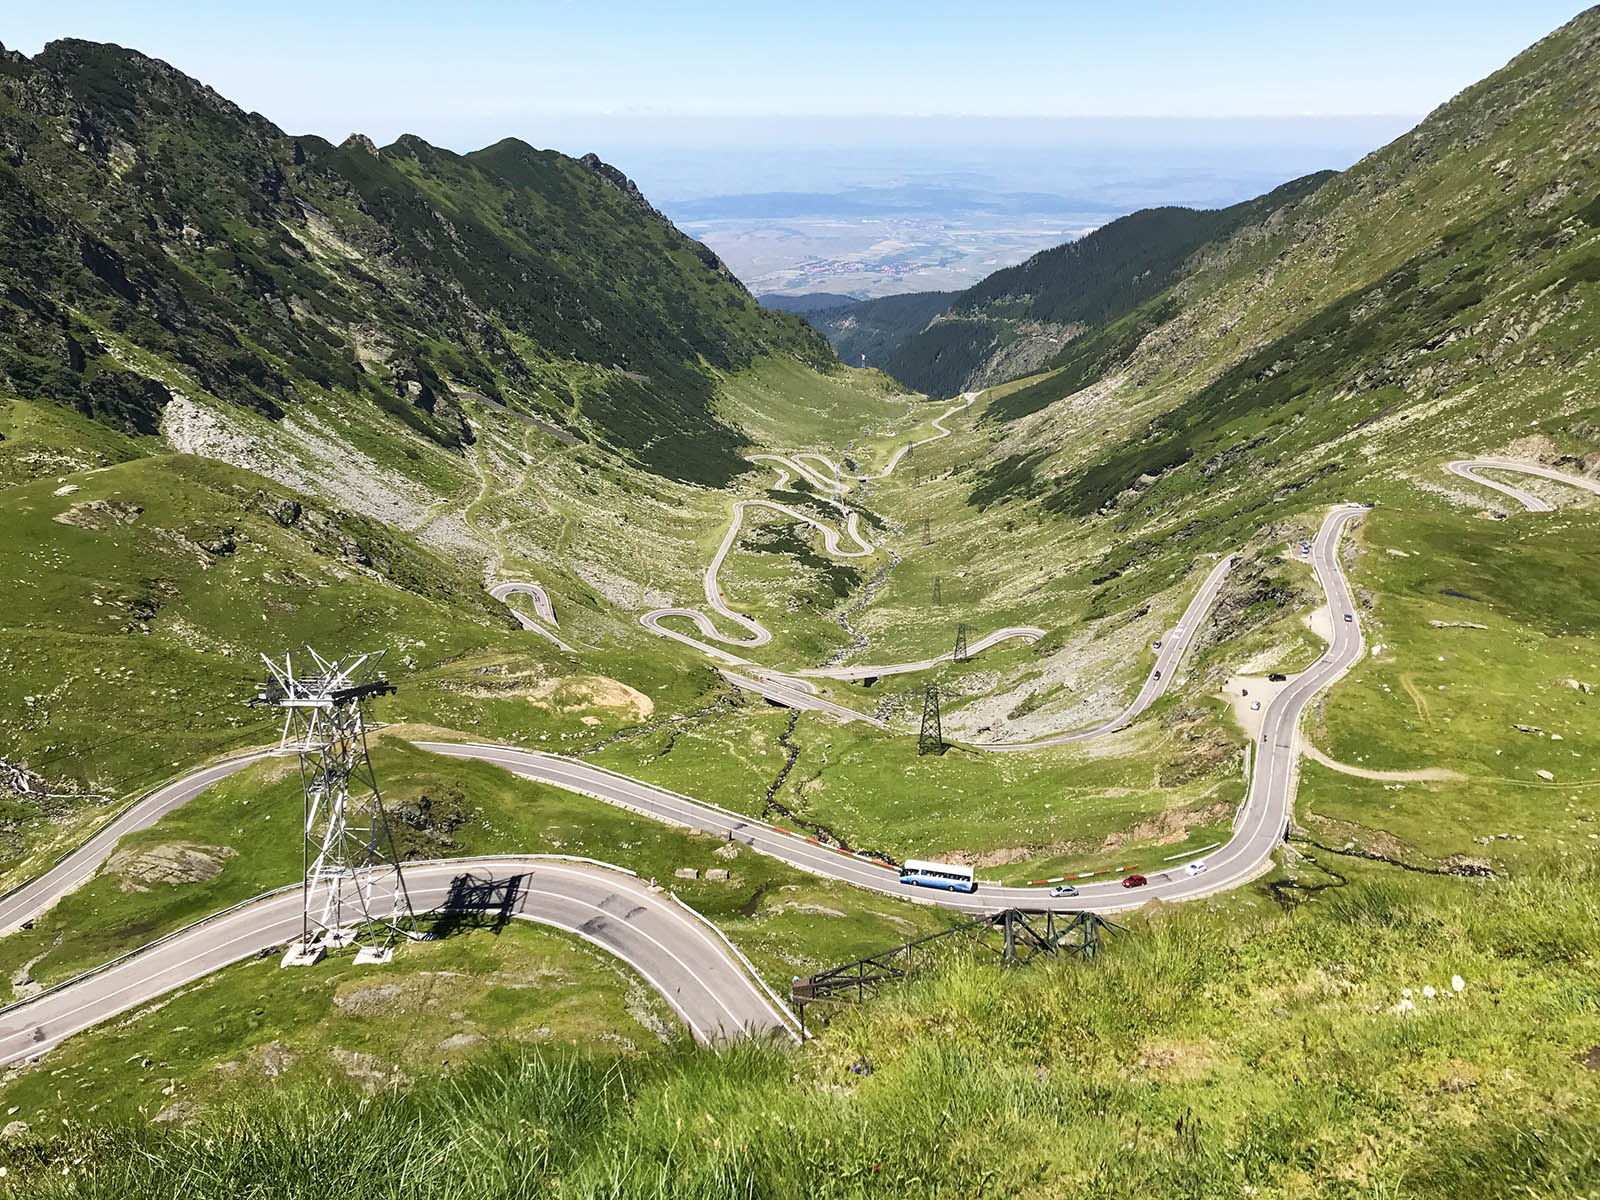 The Transfagarasan road offers a unique experience: driving in one of the most scenic highways in the world.